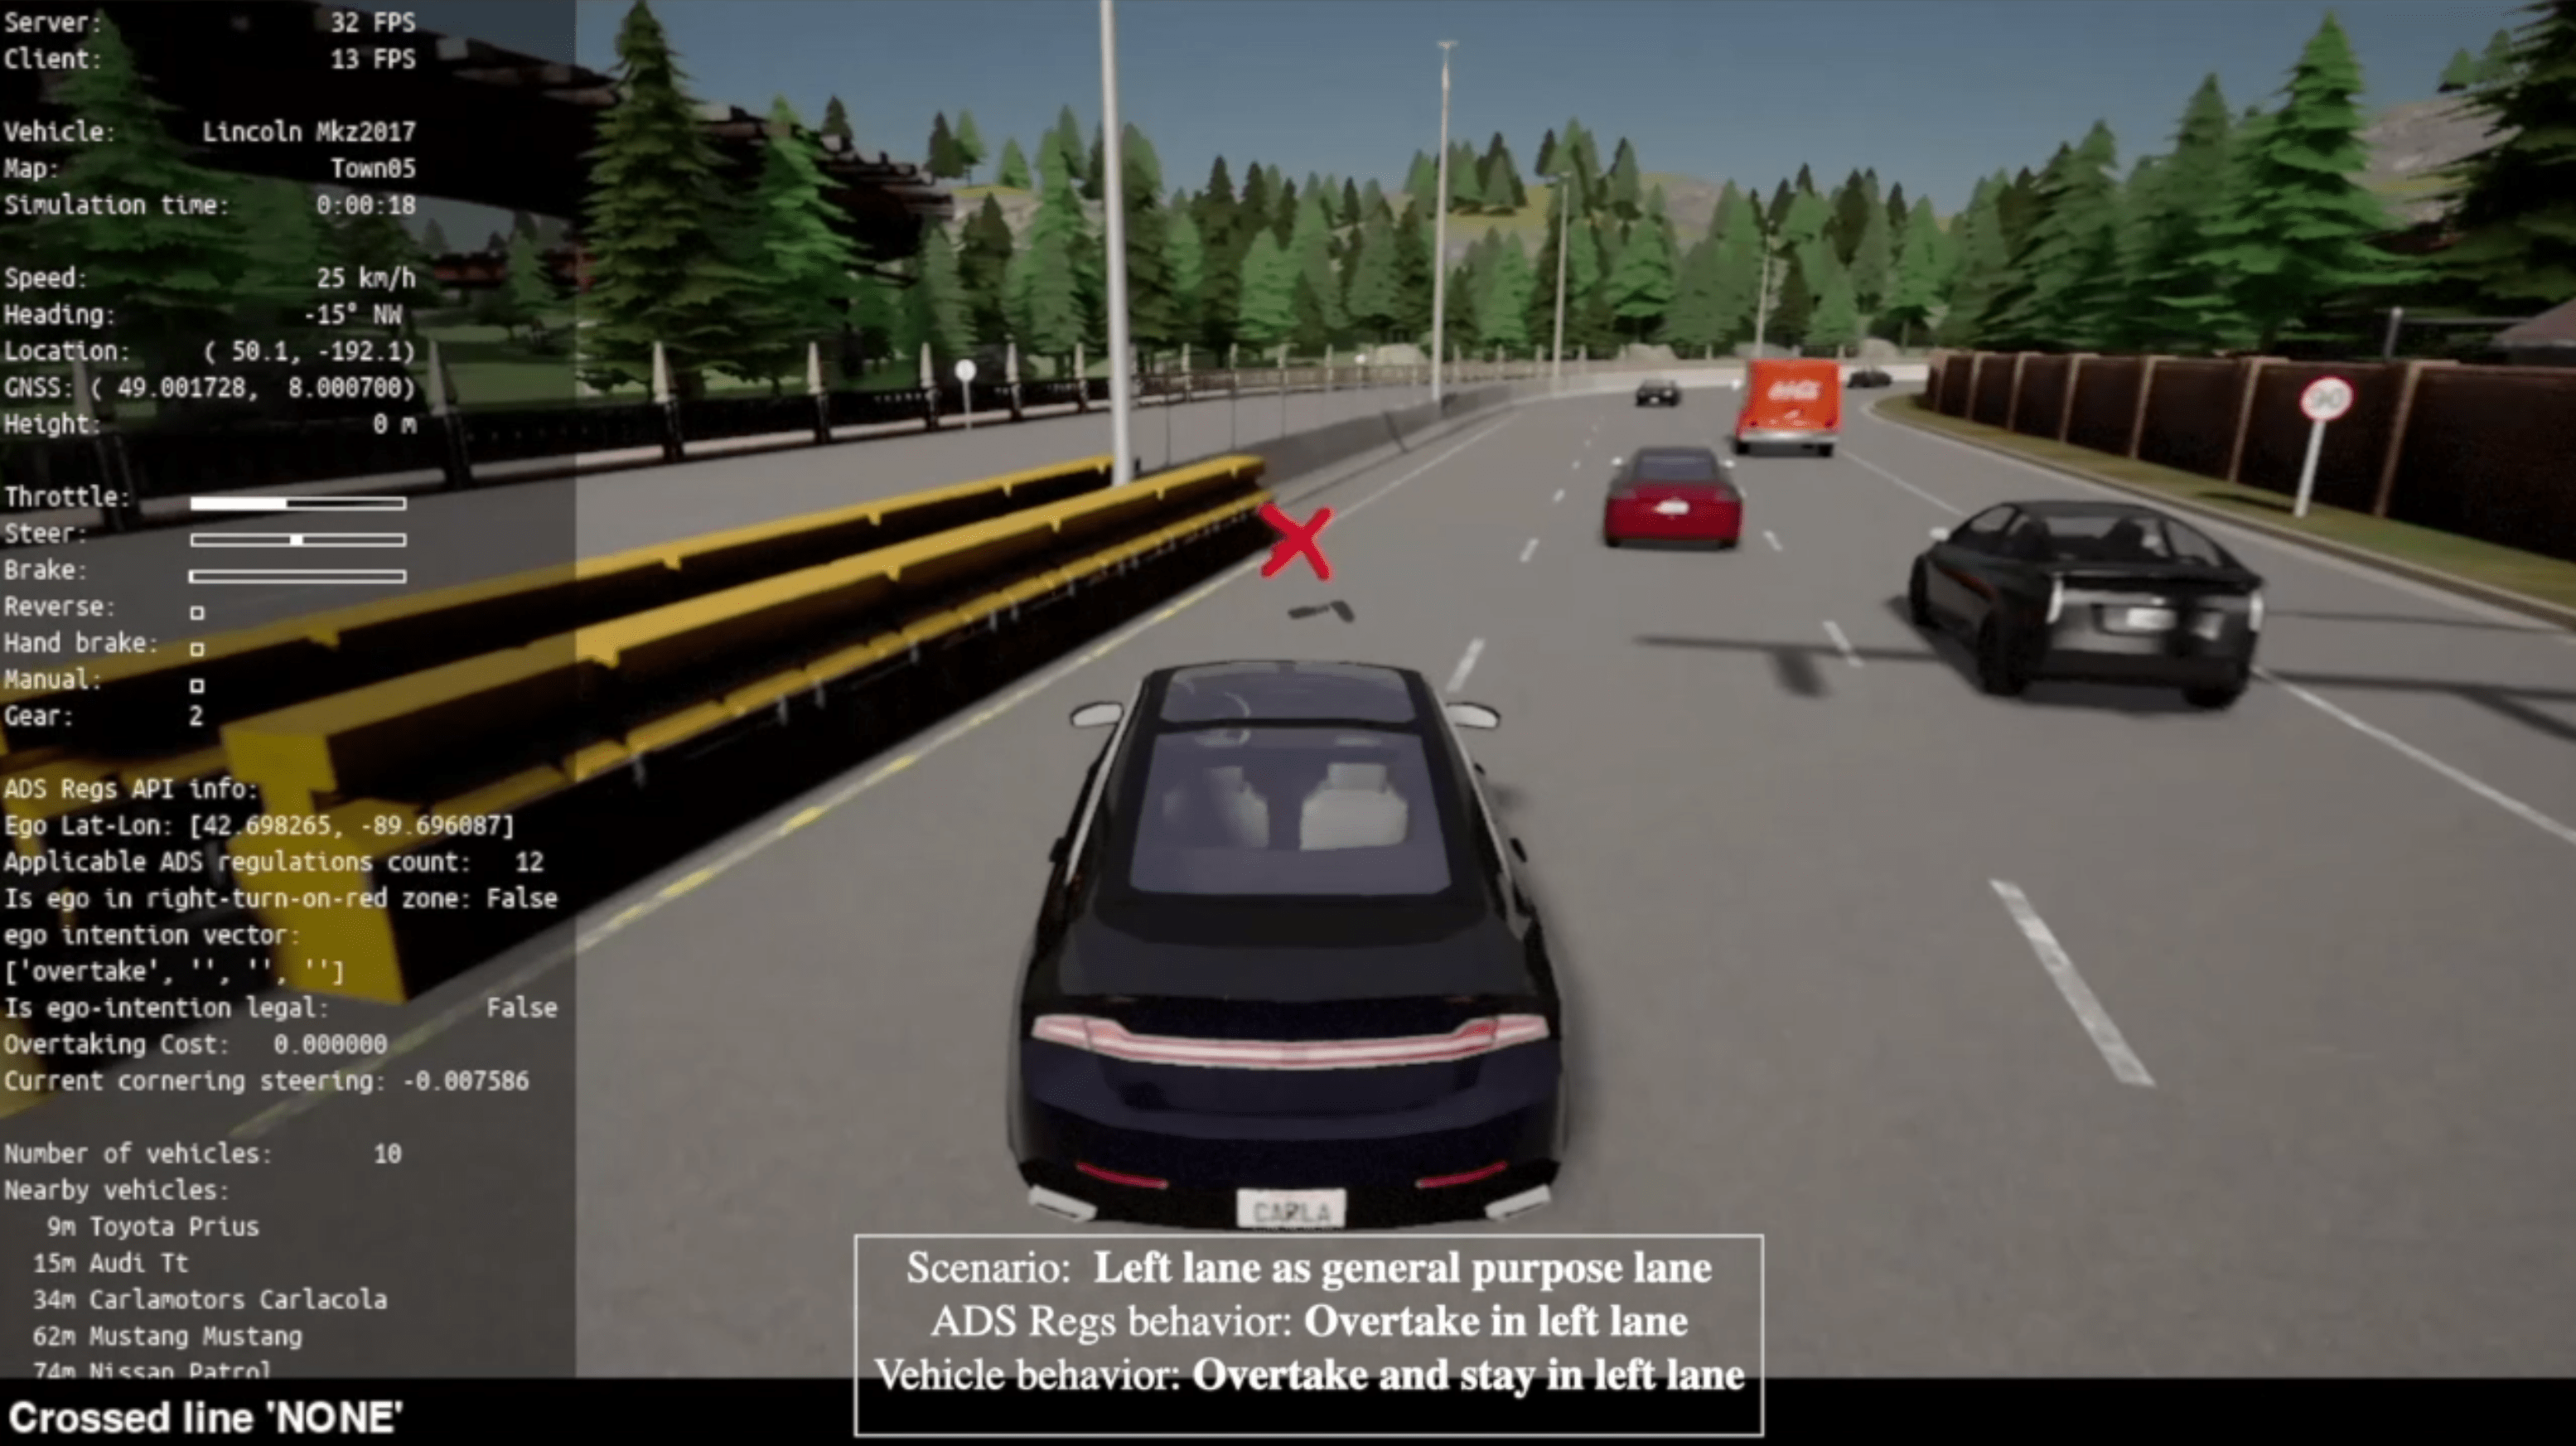 Simulated vehicle crossing from the center travel lane into the left lane on a three-lane roadway. A single X is overlaid on the left lane in front of the vehicle's trajectory. A panel at left illustrates information about the simulation.